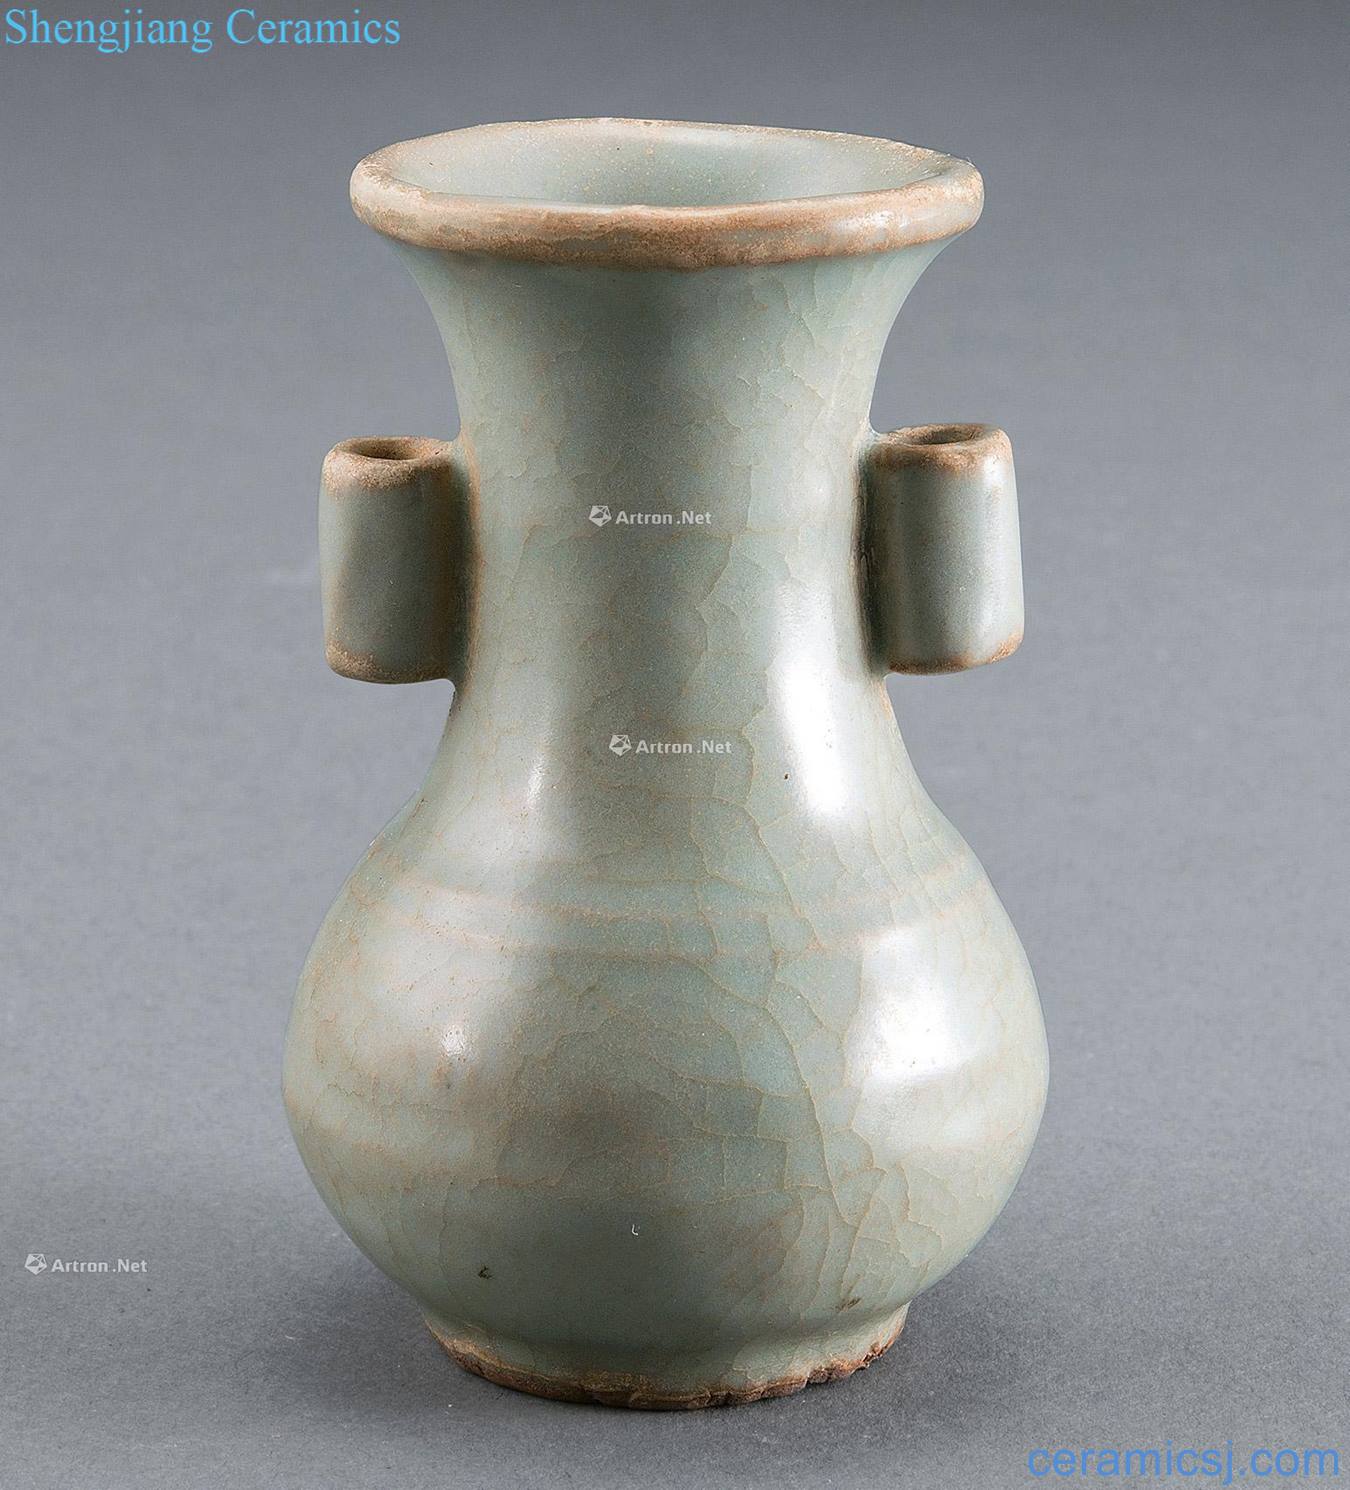 The southern song dynasty Longquan celadon vase with a little penetration